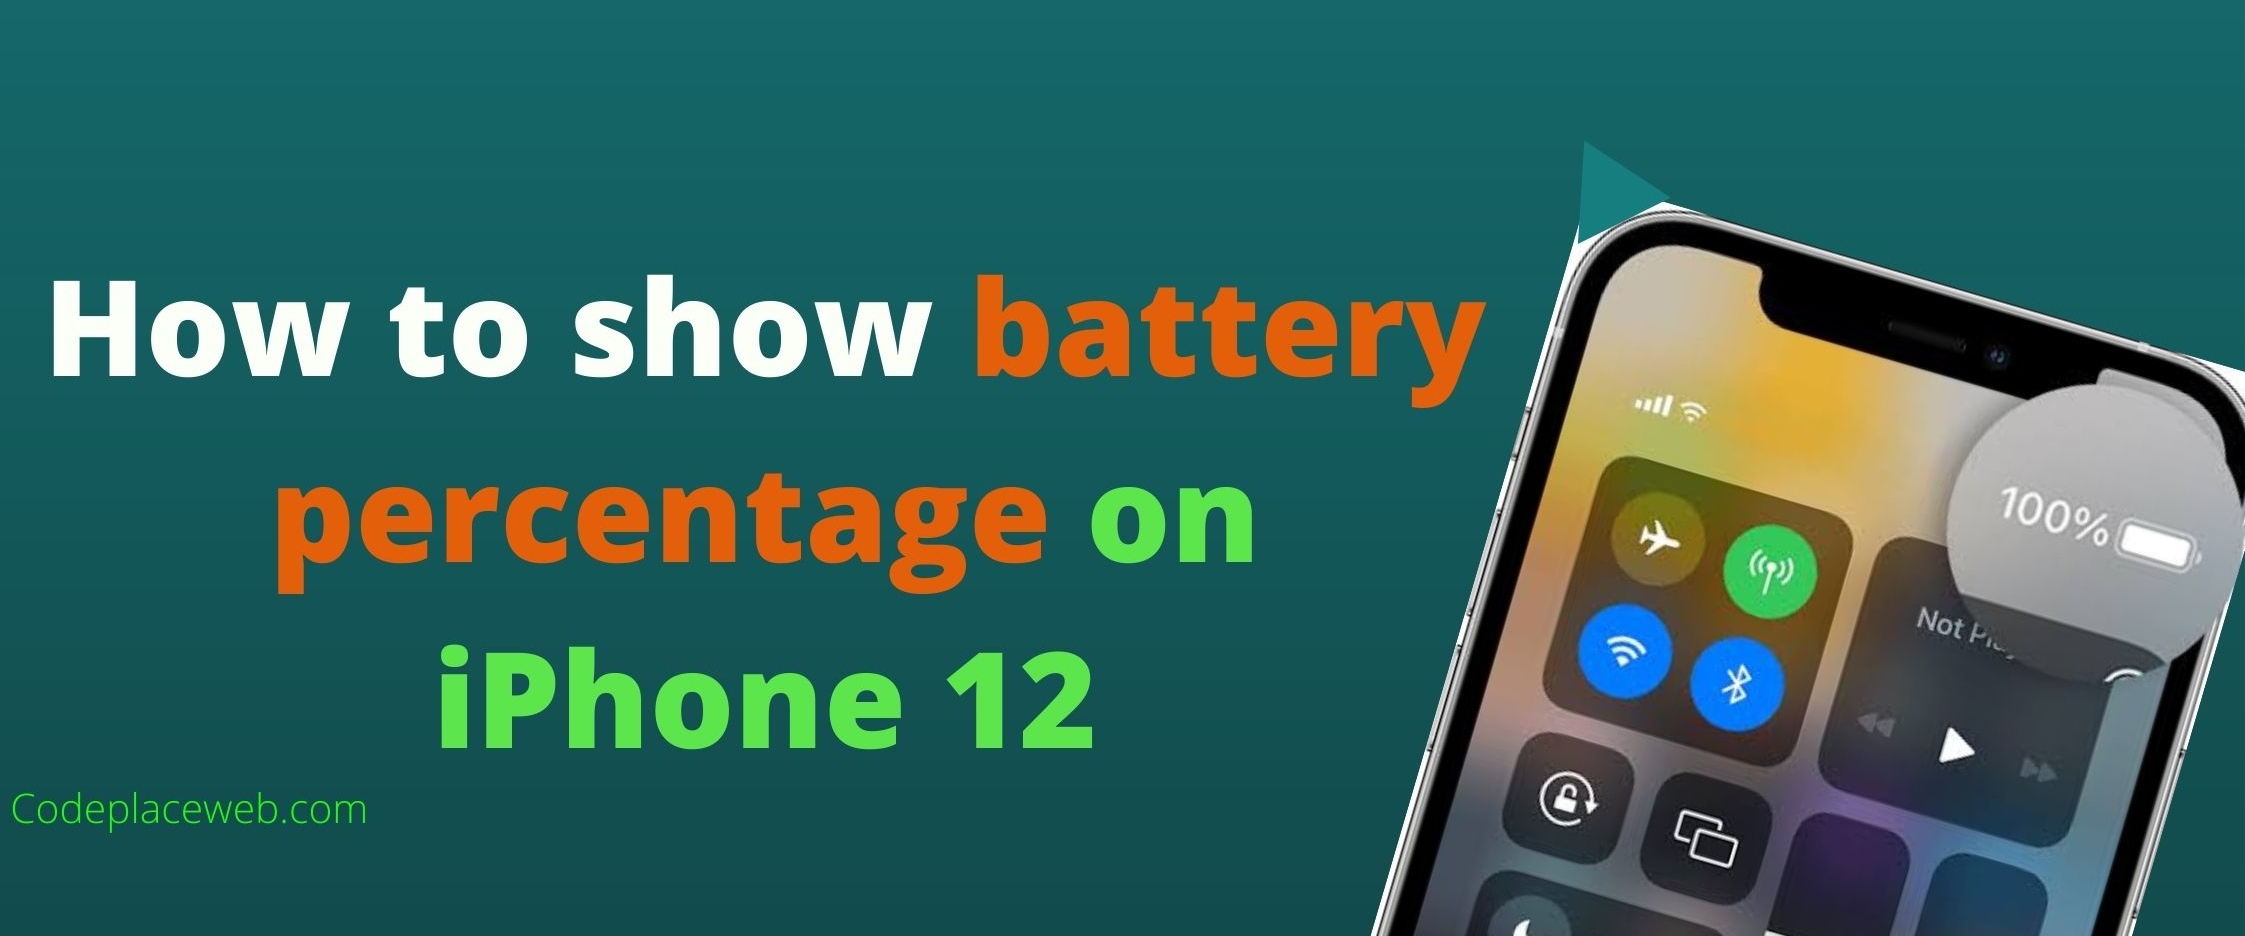 how-to-show-battery-percentage-on-iphone-12